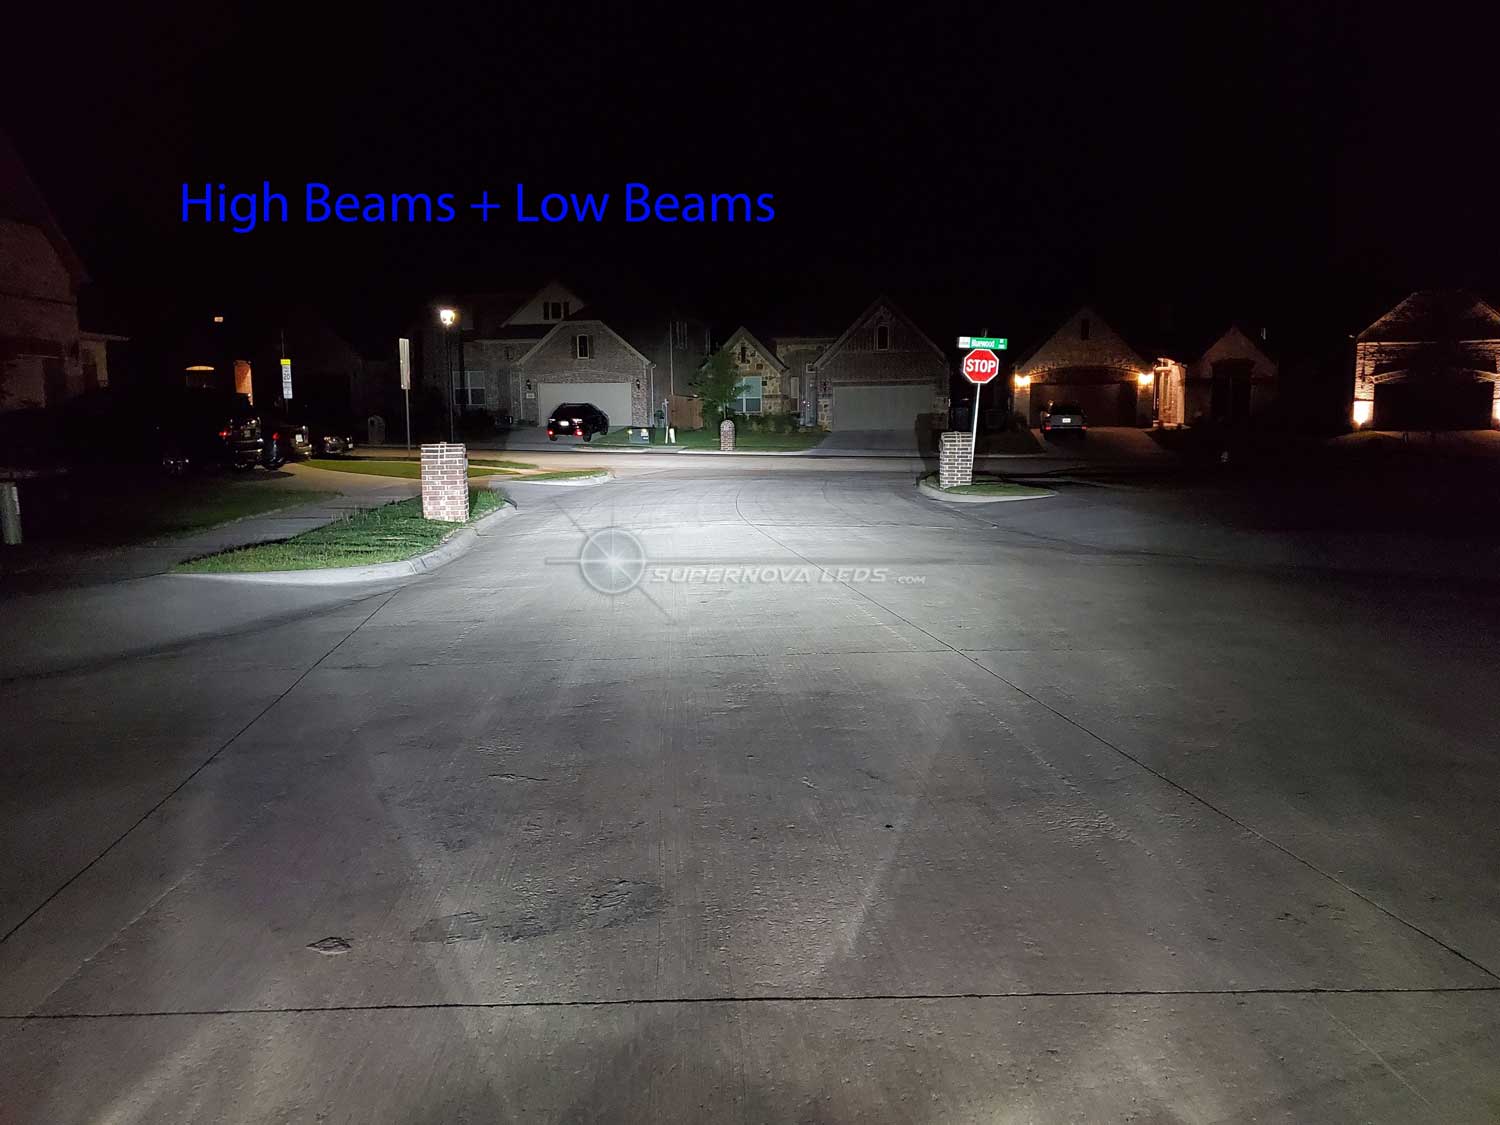 Supernova V.4 X LEDs in a RAM 1500 low beams and high beams